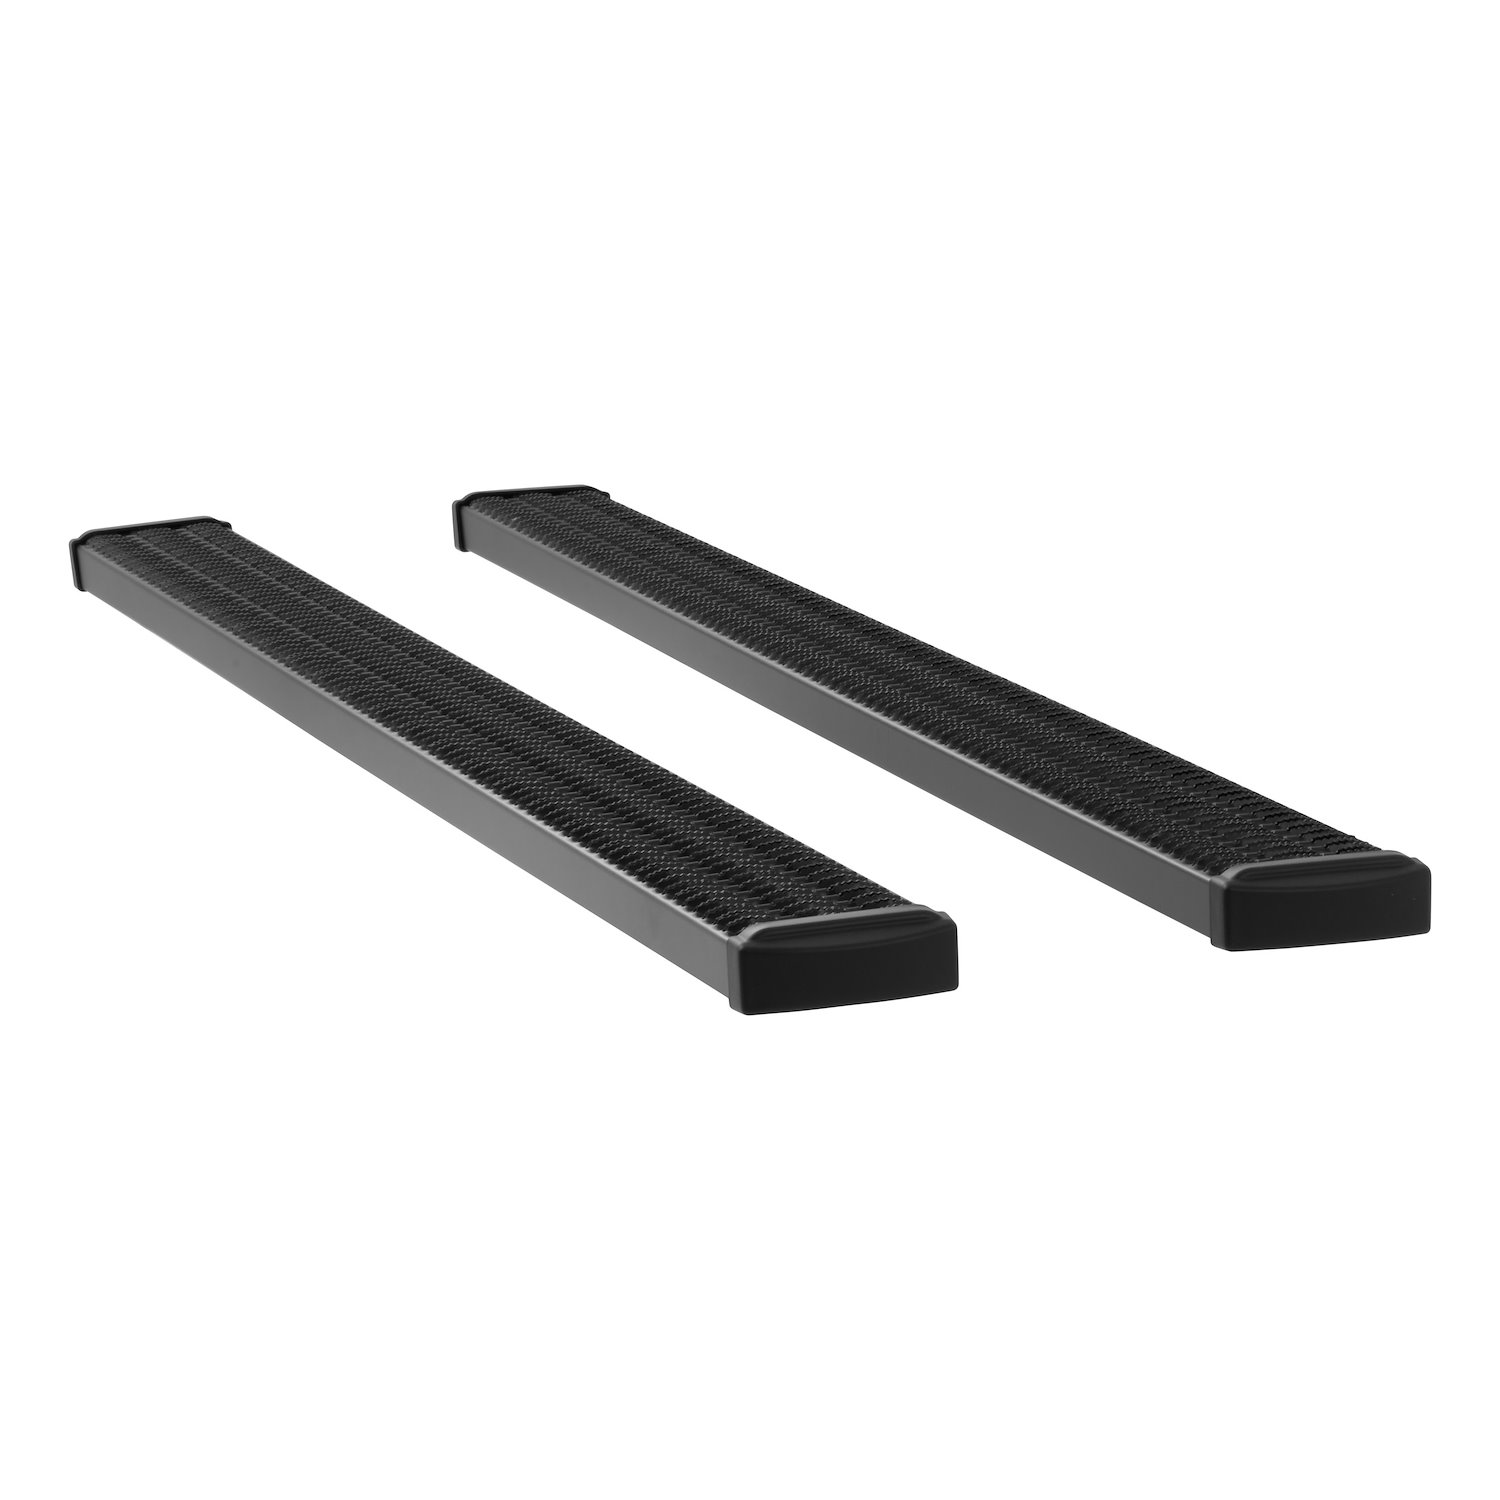 415102-401439 Grip Step 7 in. x 102 in. Aluminum Wheel-to-Wheel Running Boards Fits Select Ram 2500